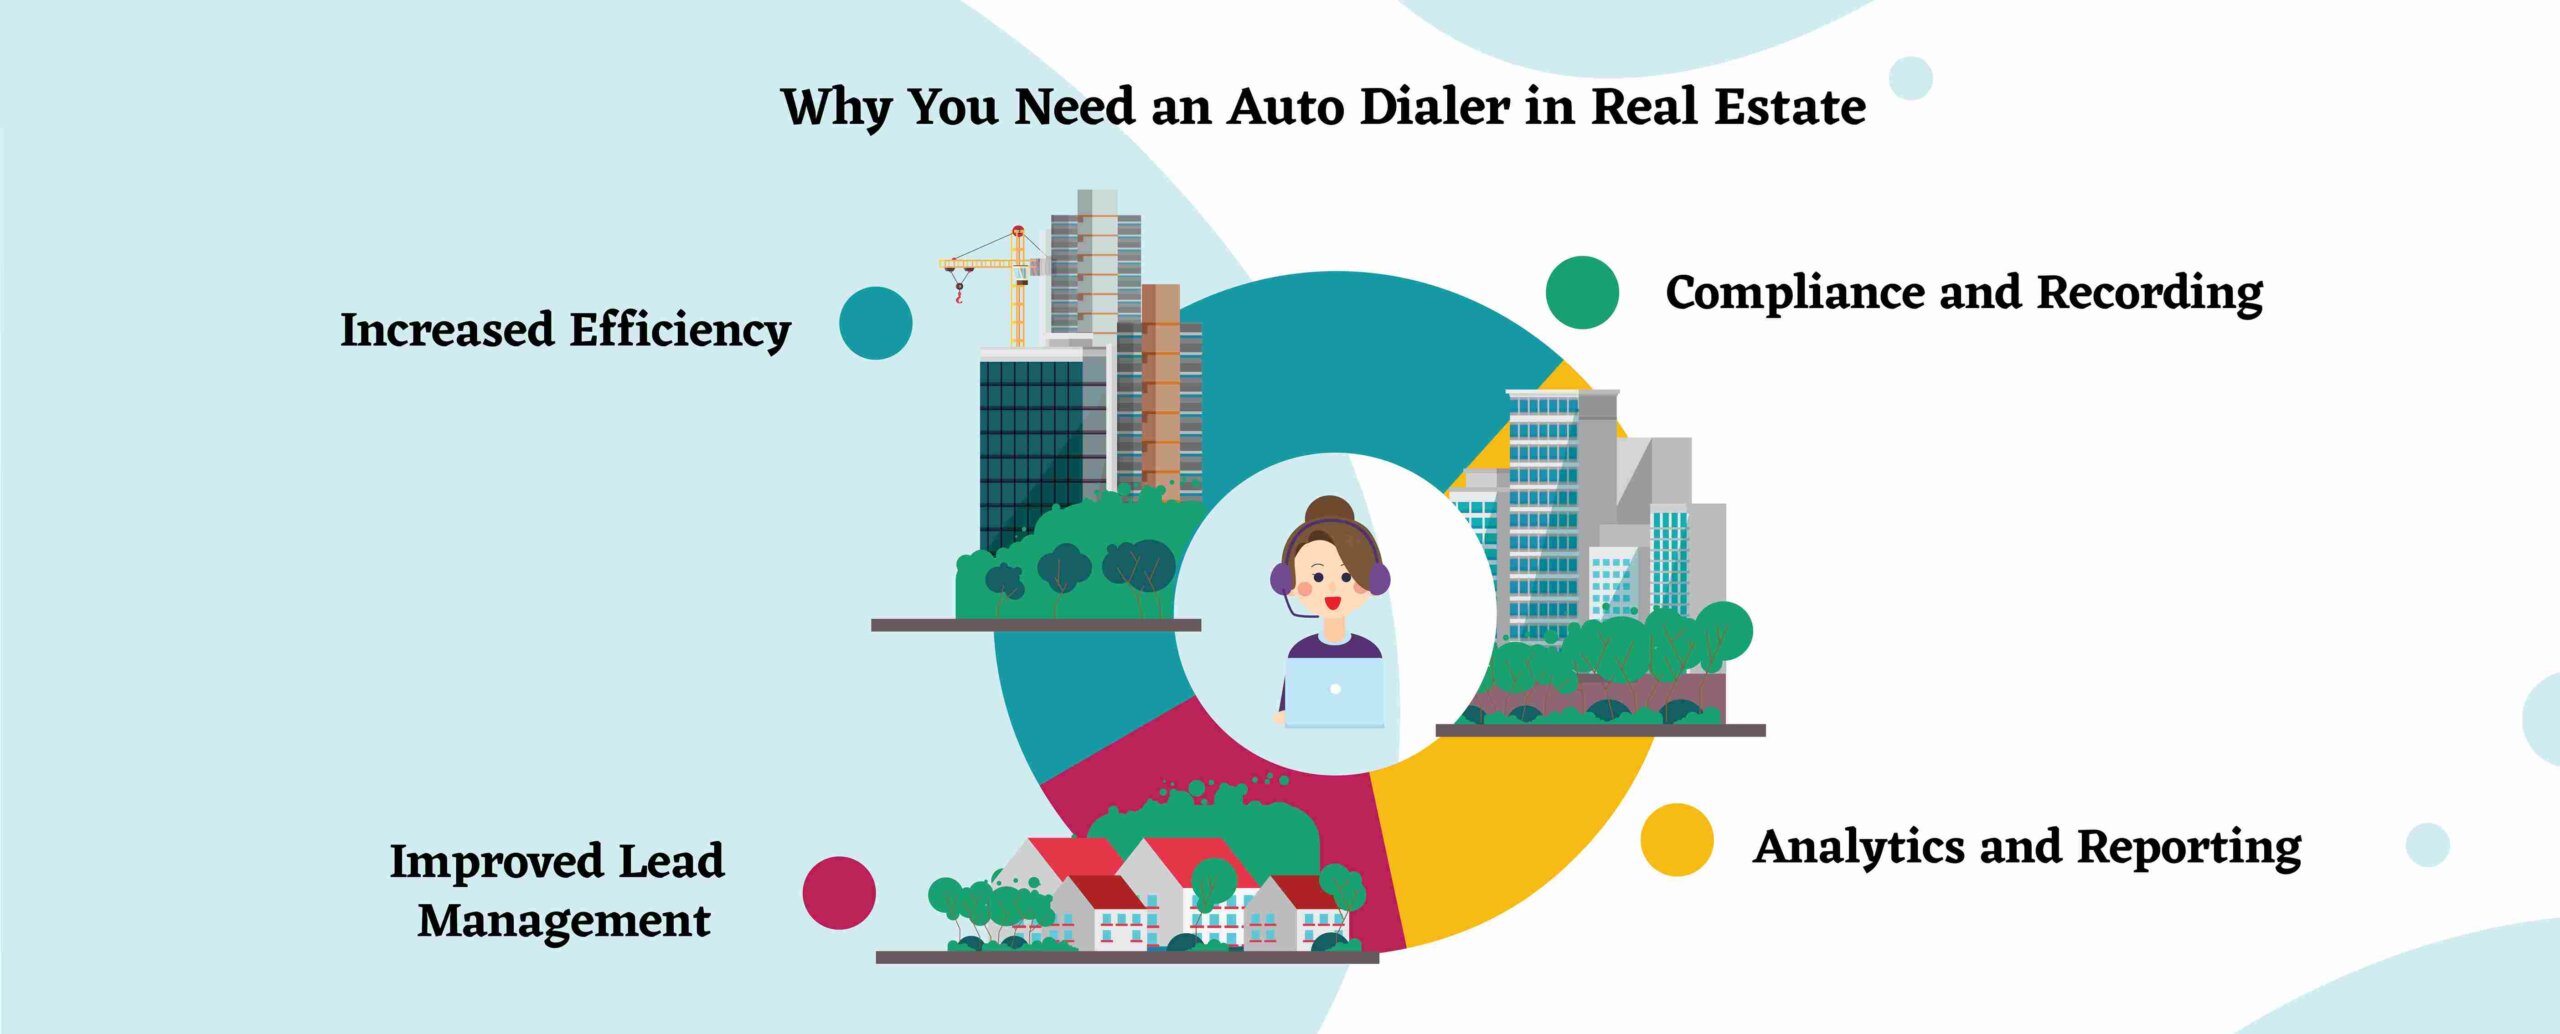 Why You Need an Auto Dialer in Real Estate